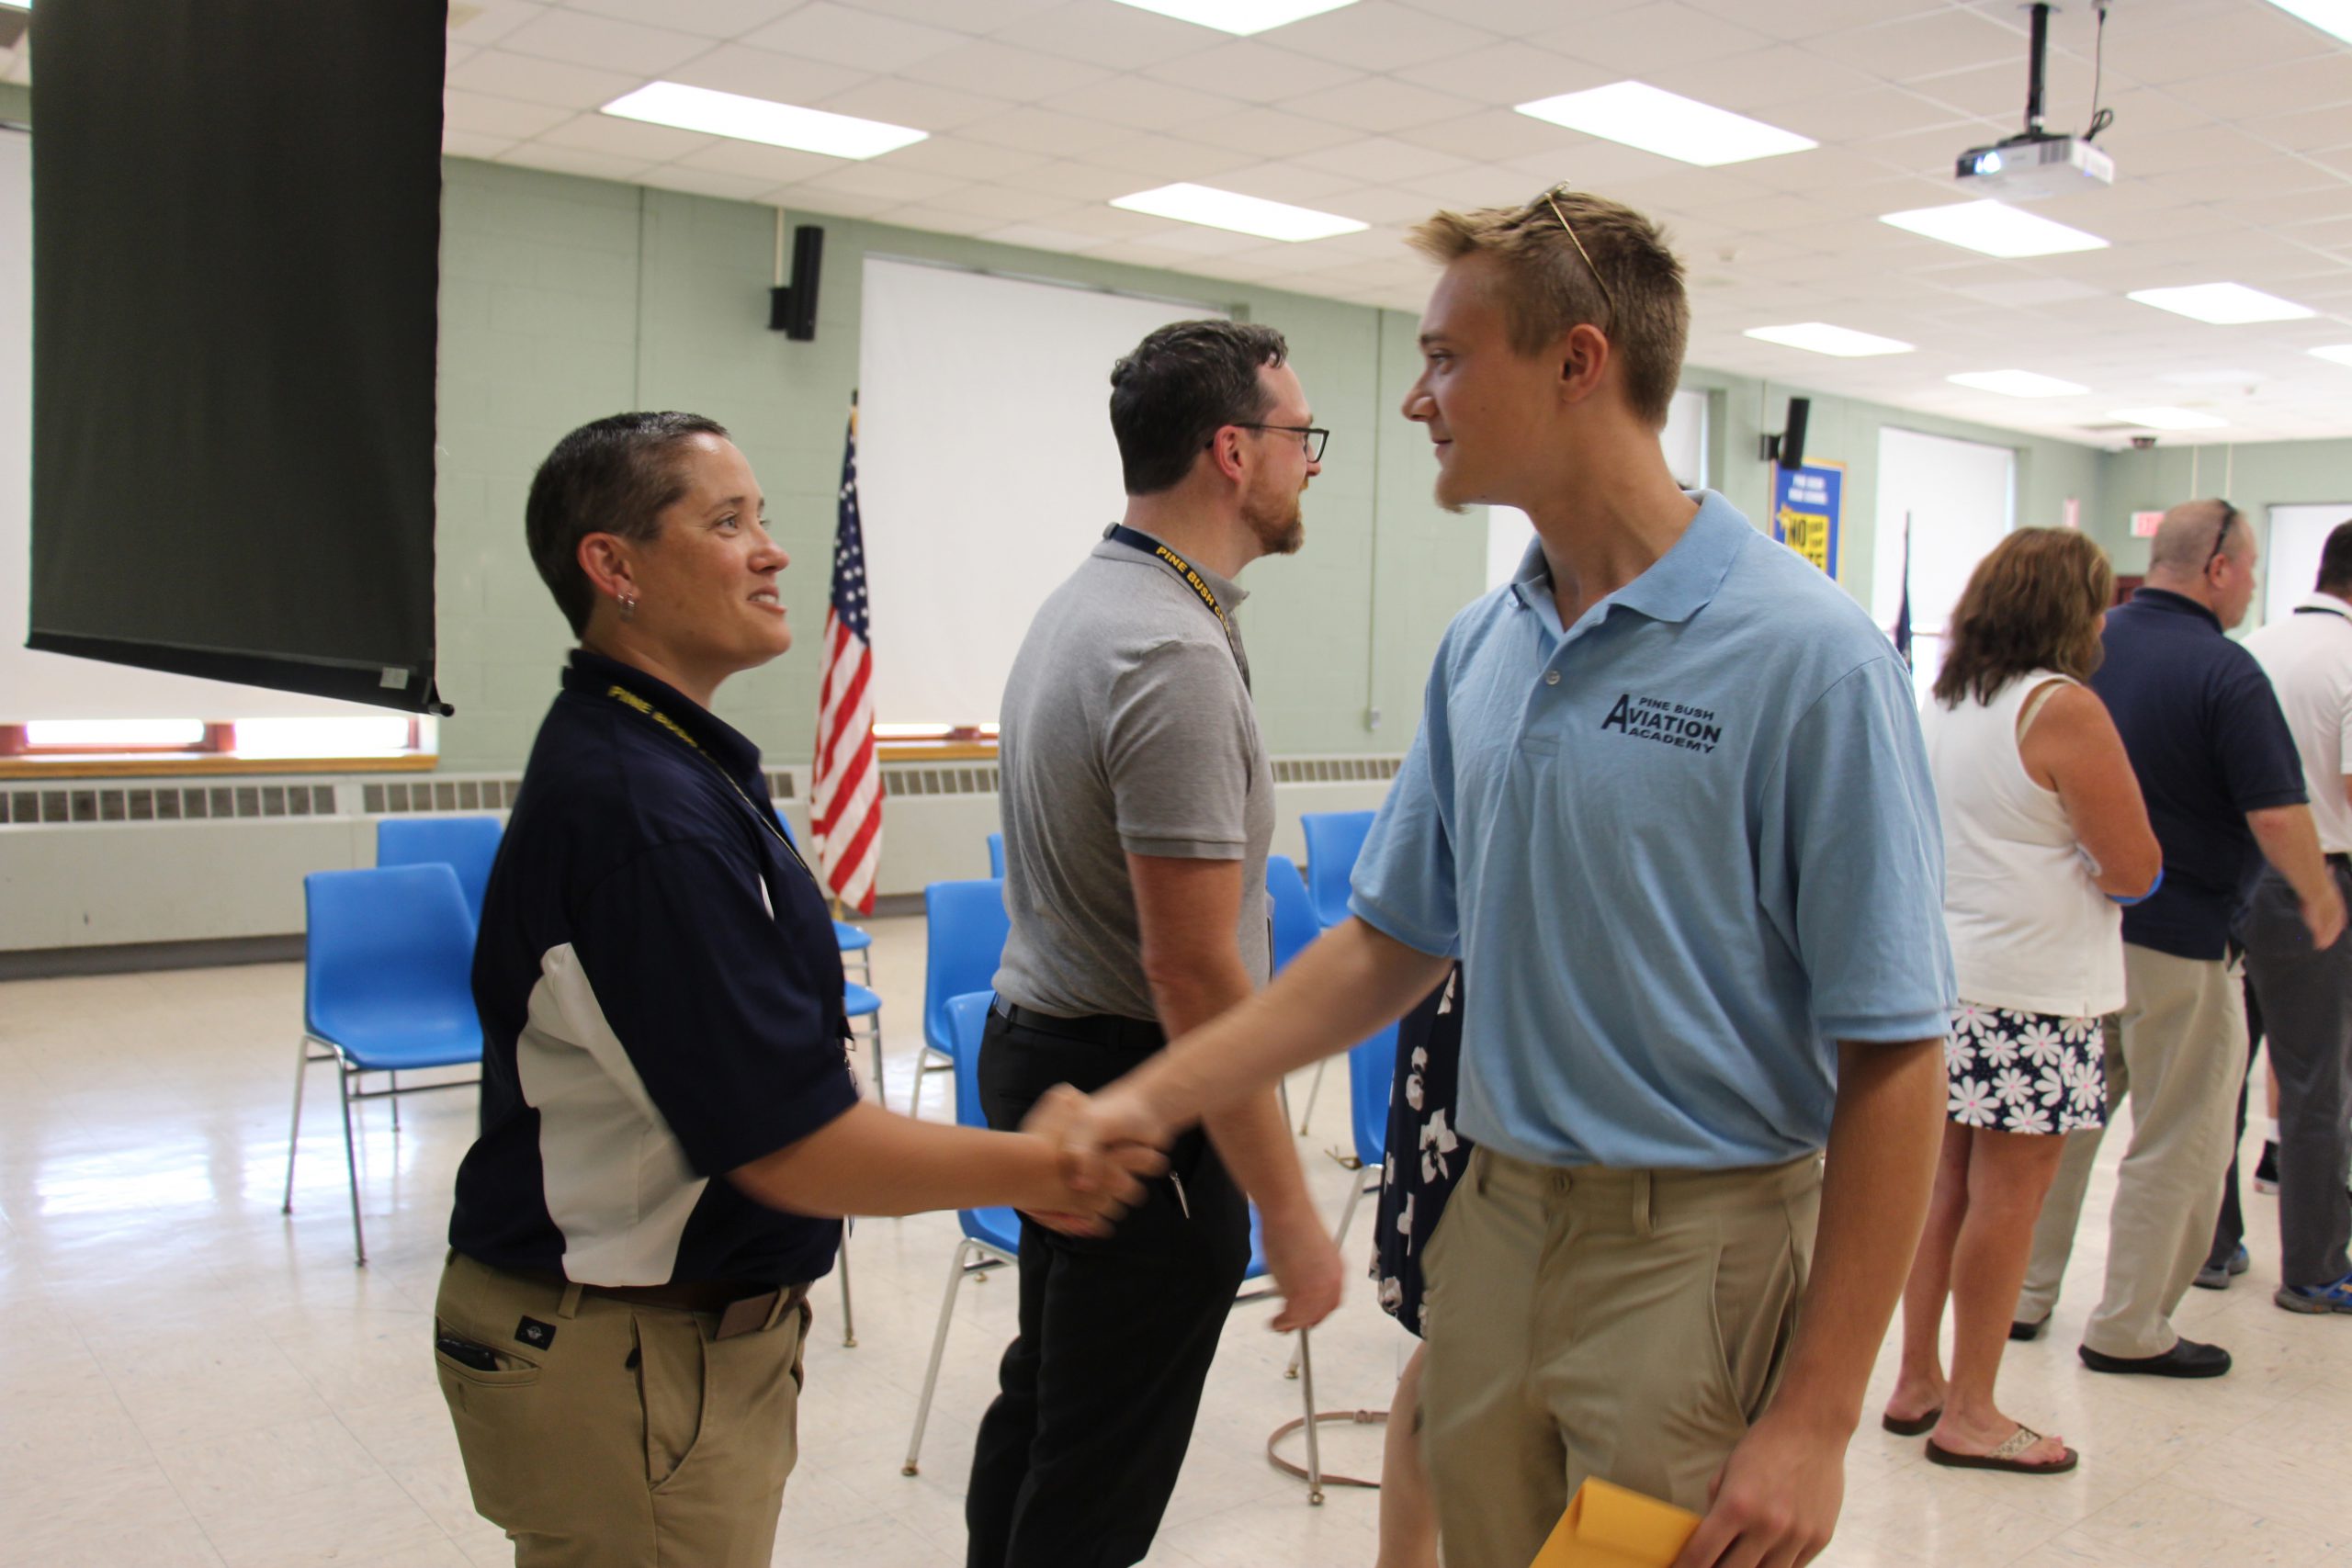 A tall high school young man wearing a light blue shirt and tan pants, shakes hands with a woman with short dark hair and wearing a blue and white shirt.